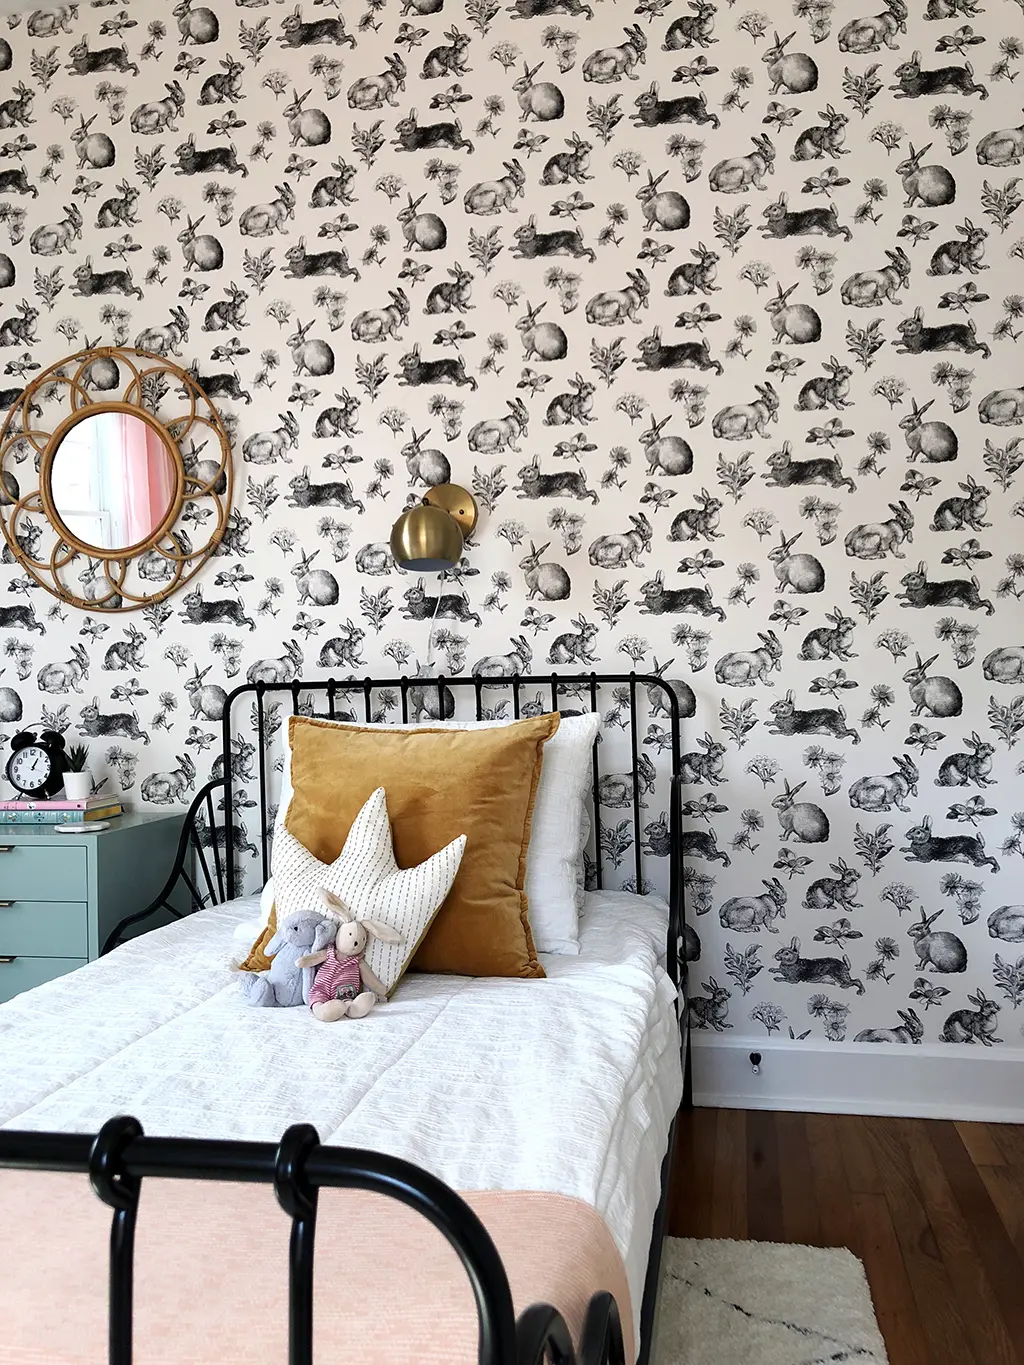 twin bed with white bedding and rabbit wallpaper